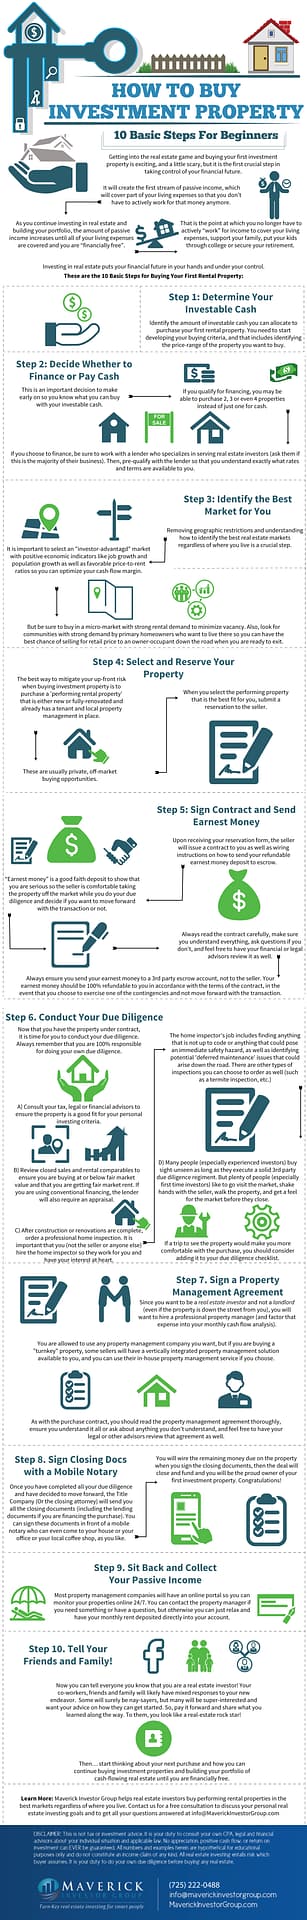 InfoGraphic How to Buy Investment Property